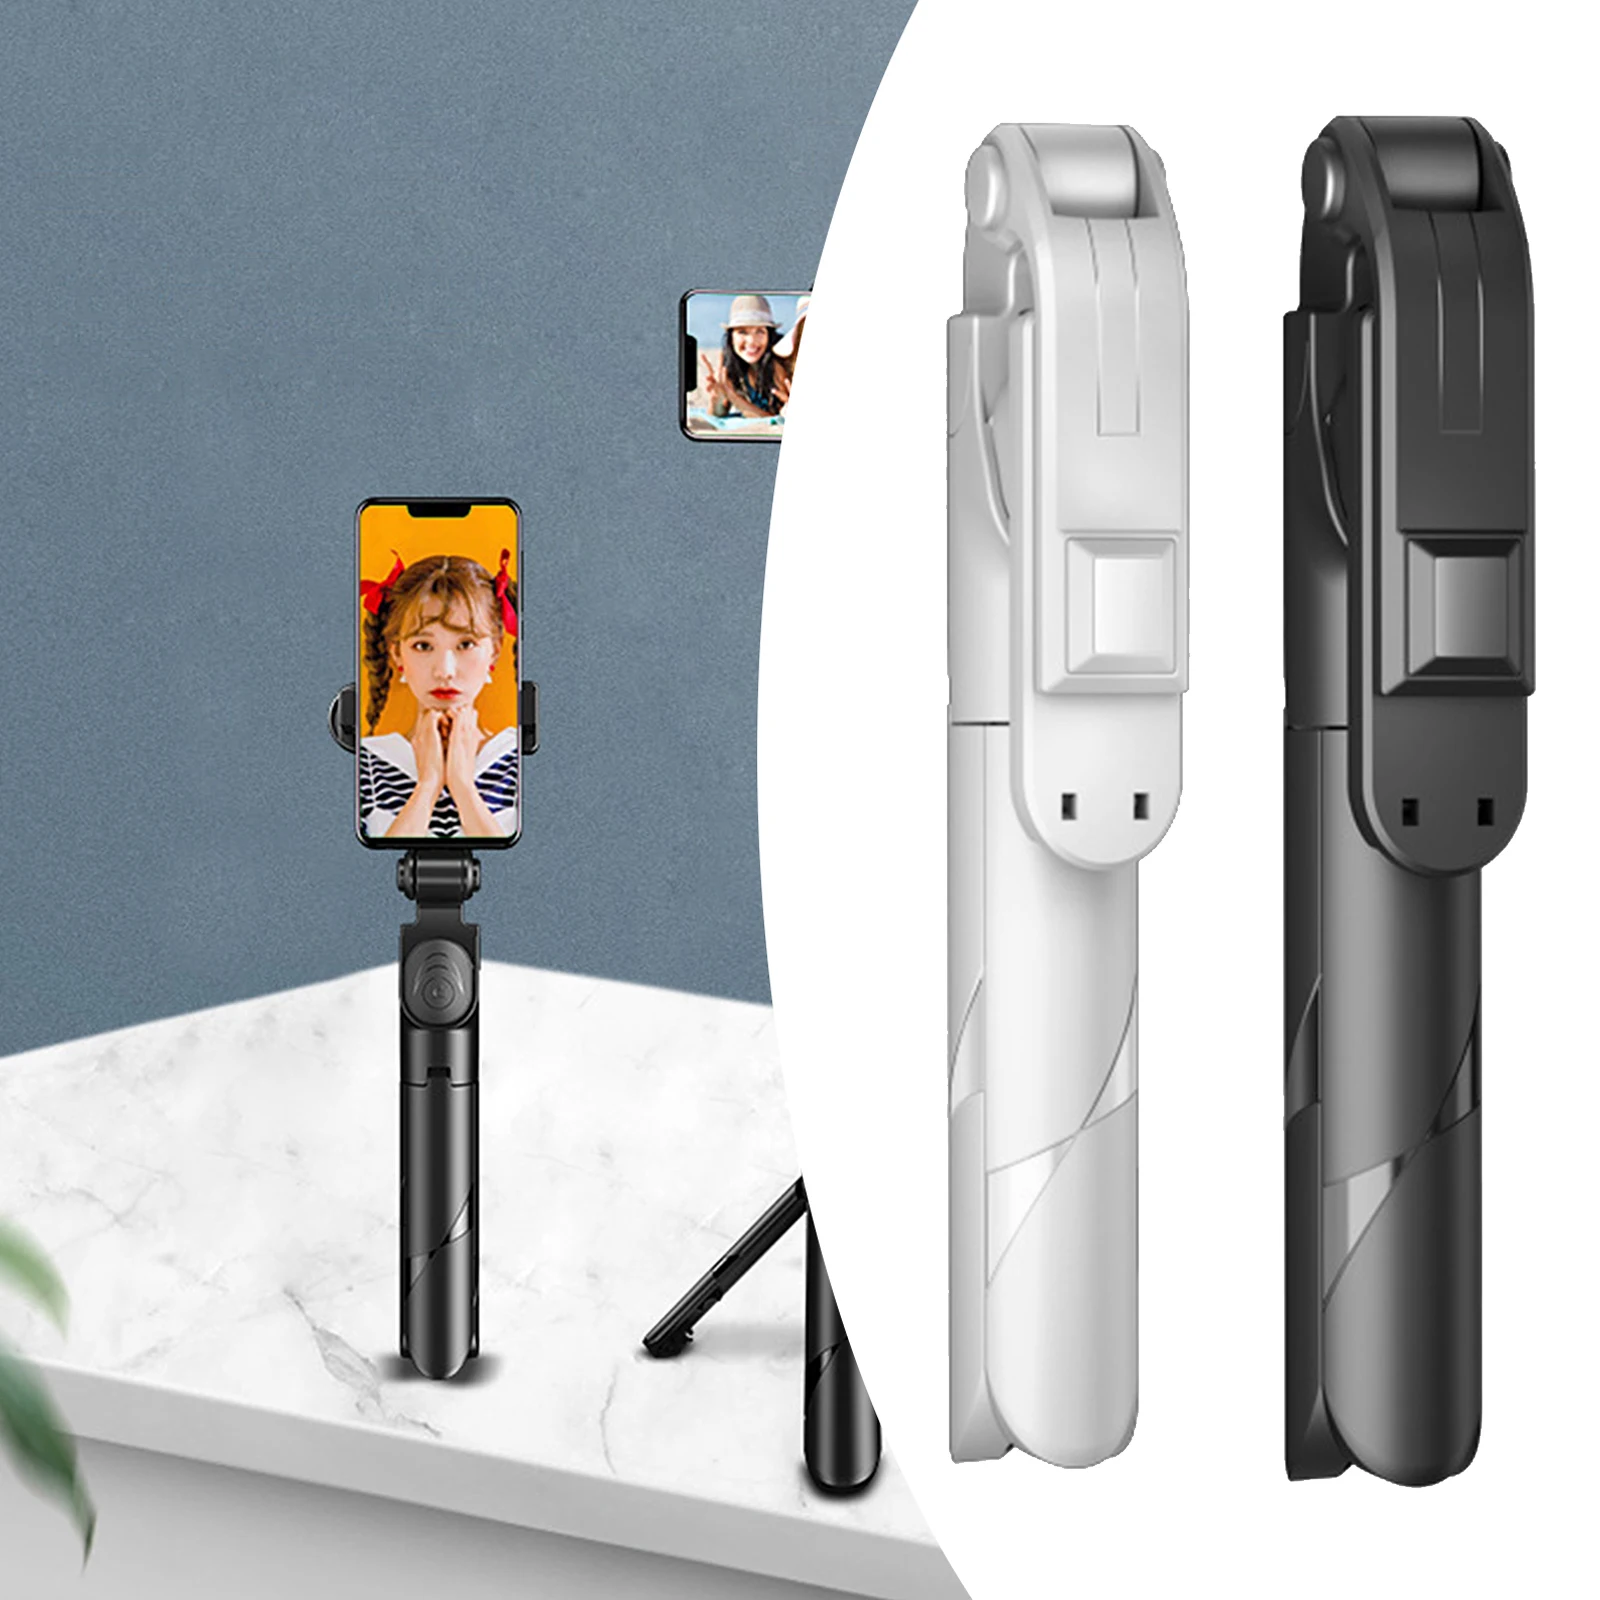 Bluetooth Selfie Stick, Handheld Extendable Phone Tripod Gimbal Anti-Shaking Stabilizer for  11 Pro/XS Max/XS/XR/X/8/7/6